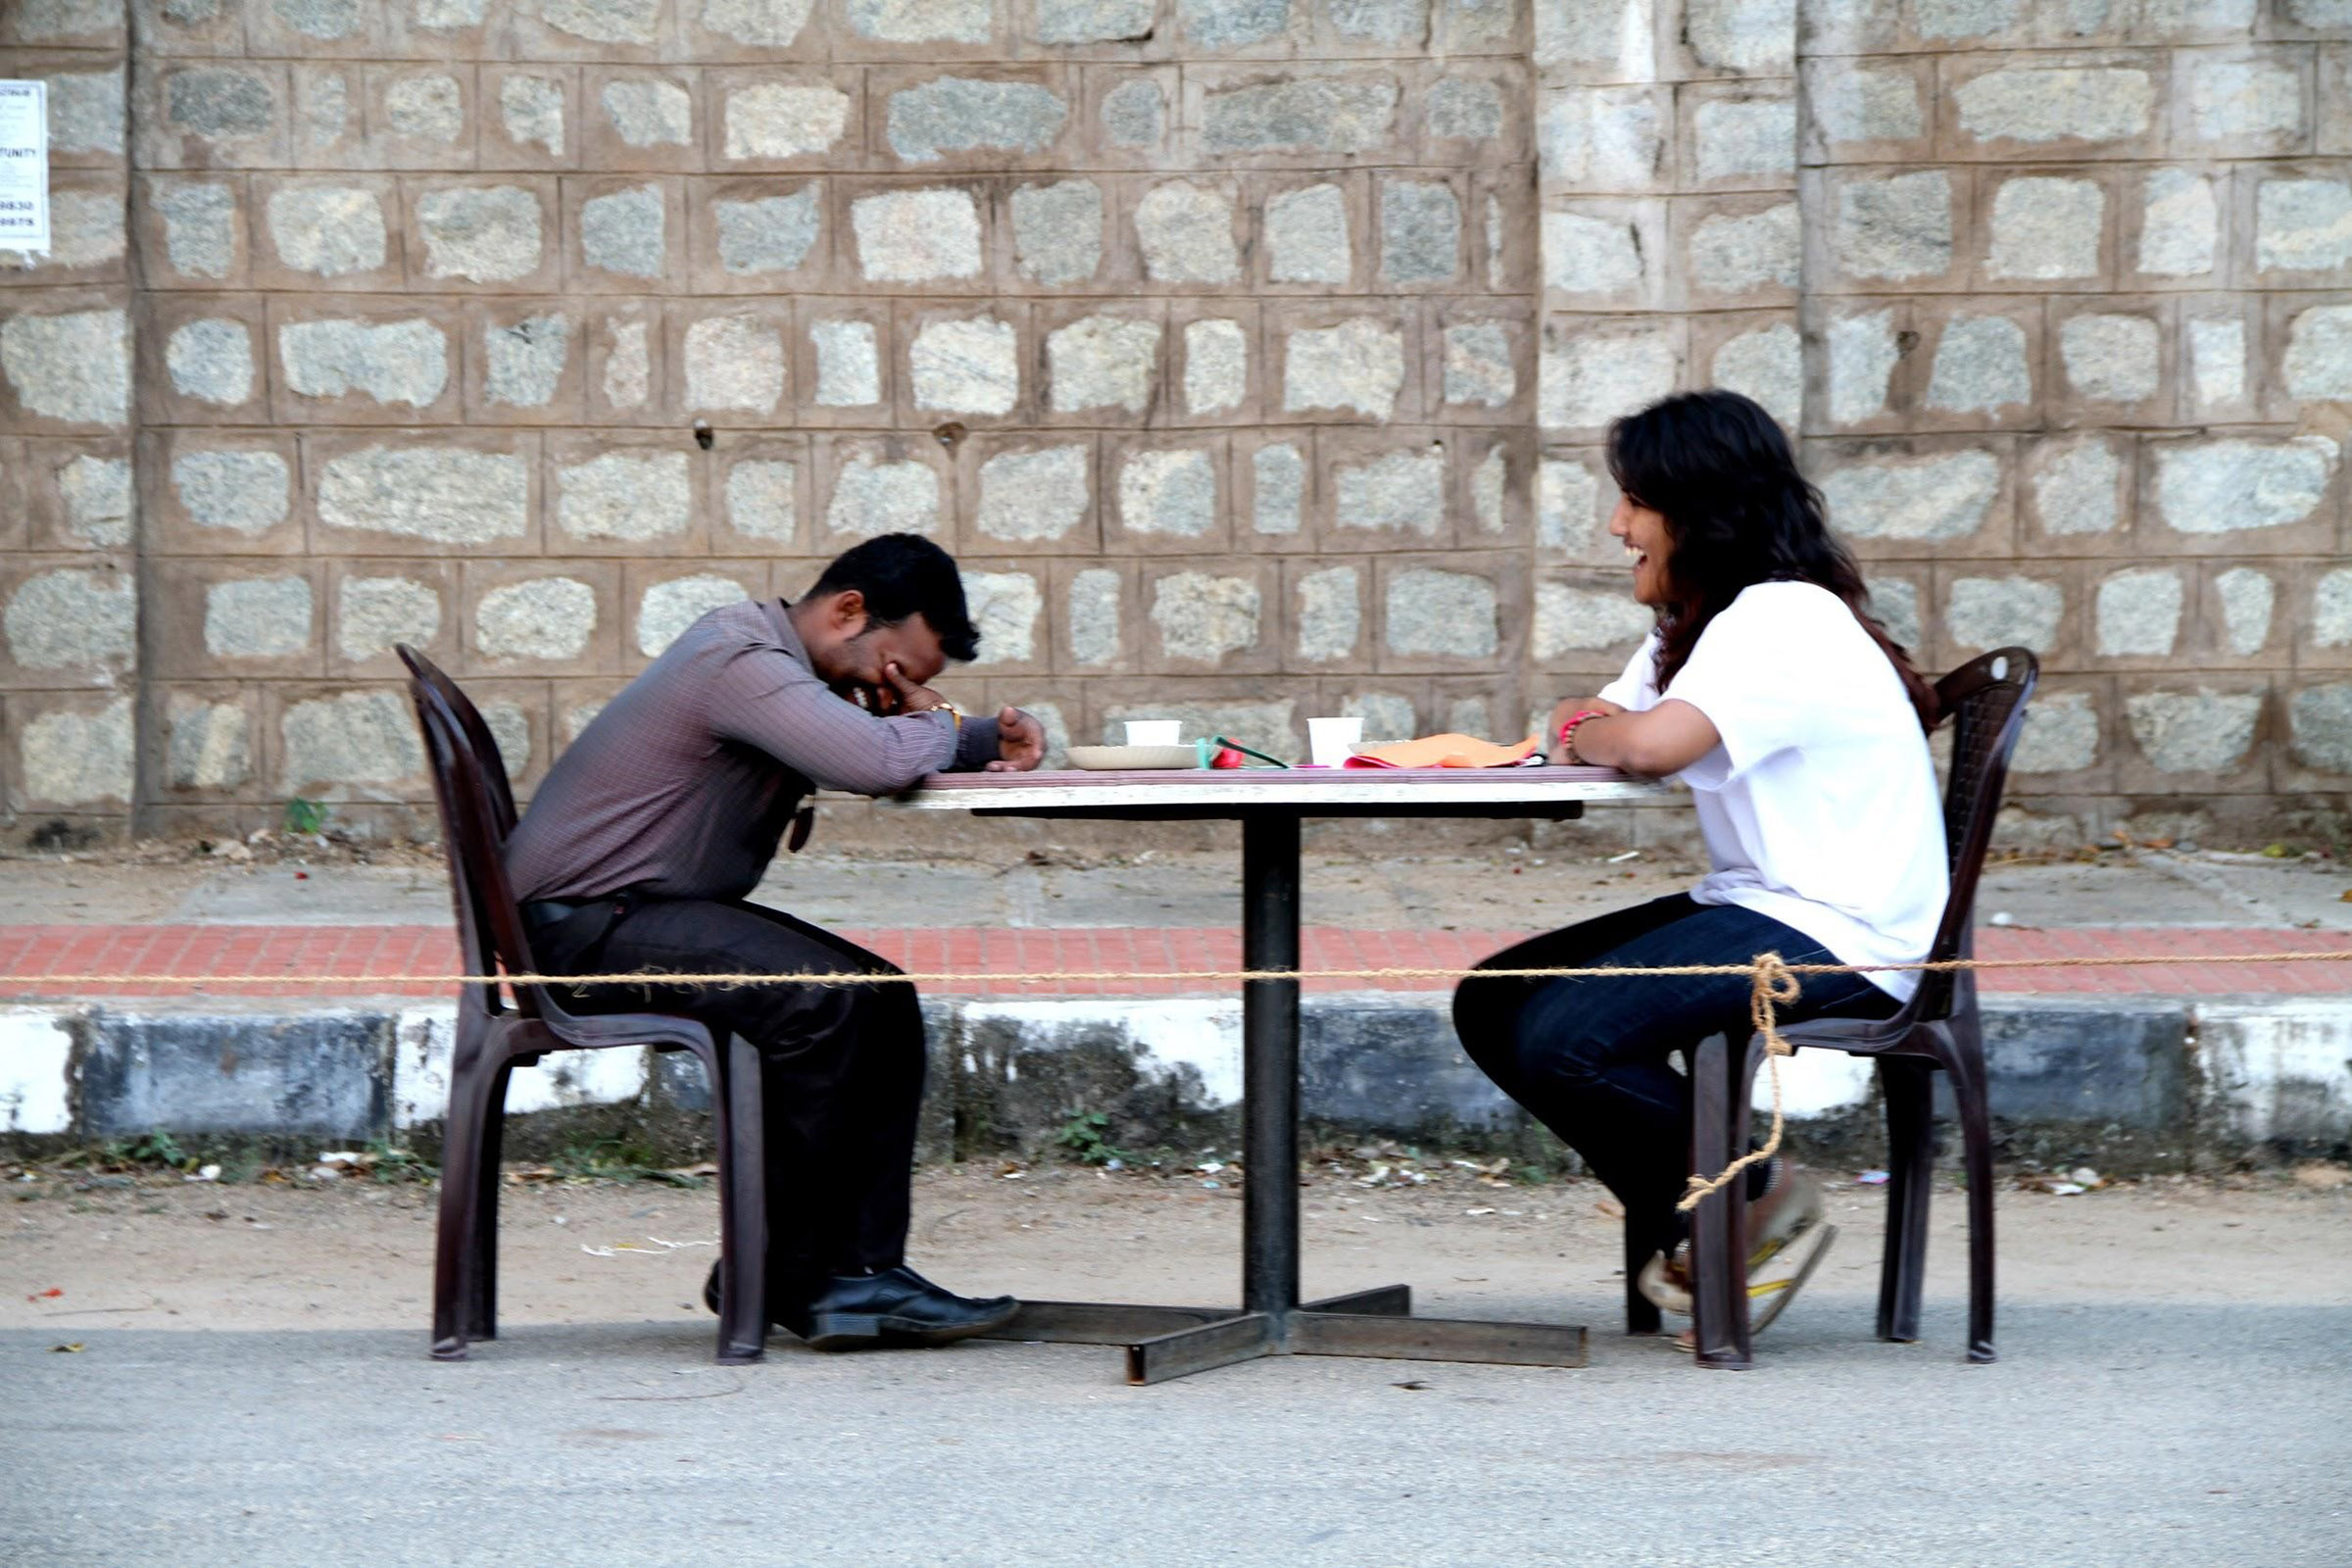 A man and a woman sit across from each other at a table outdoors, smiling.